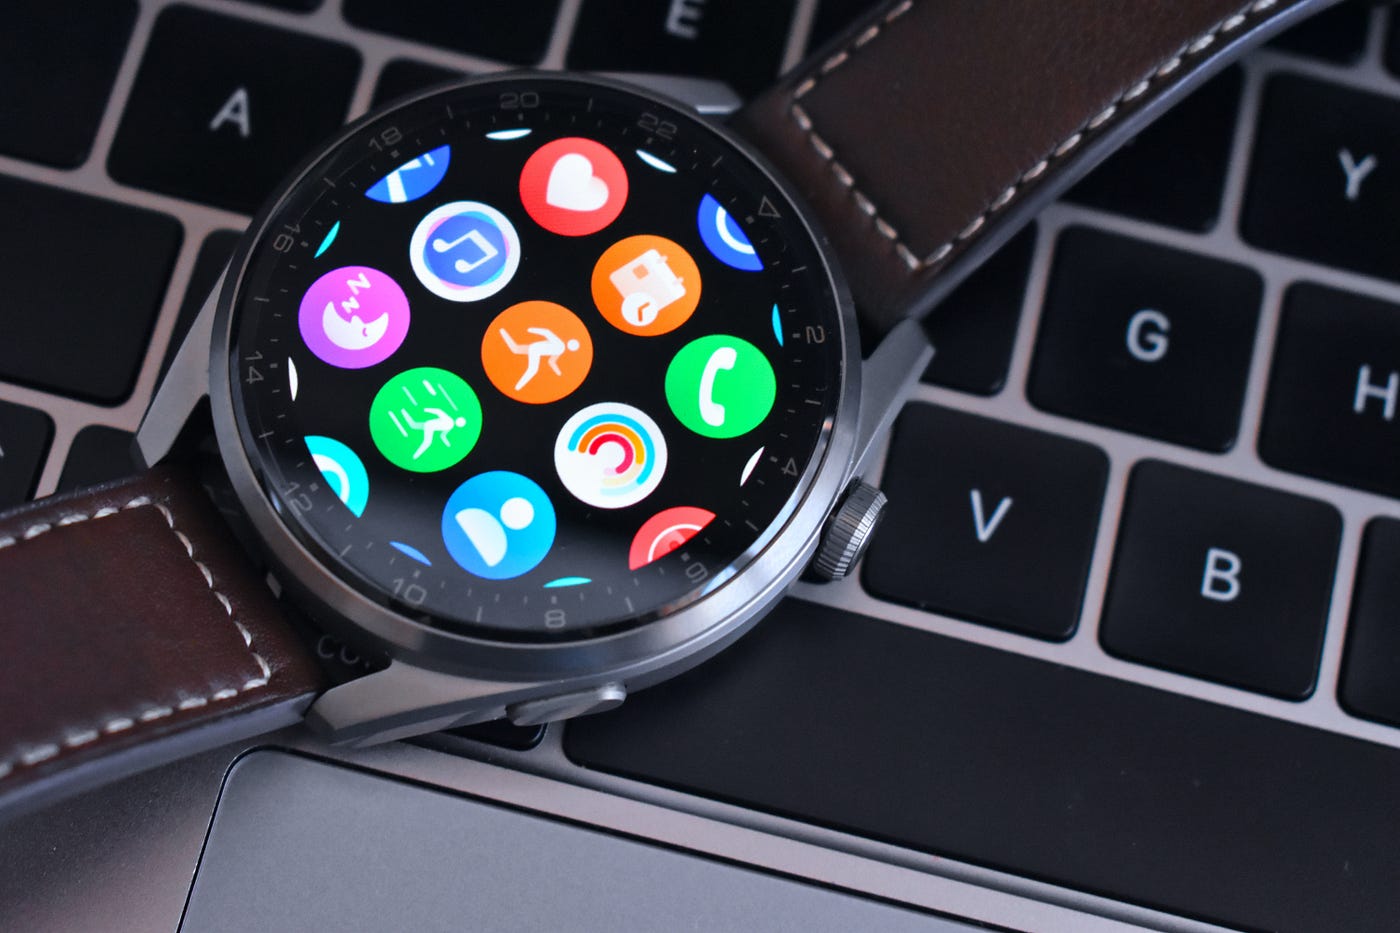 Samsung Galaxy Watch 7: News, rumors, and what we'd like to see